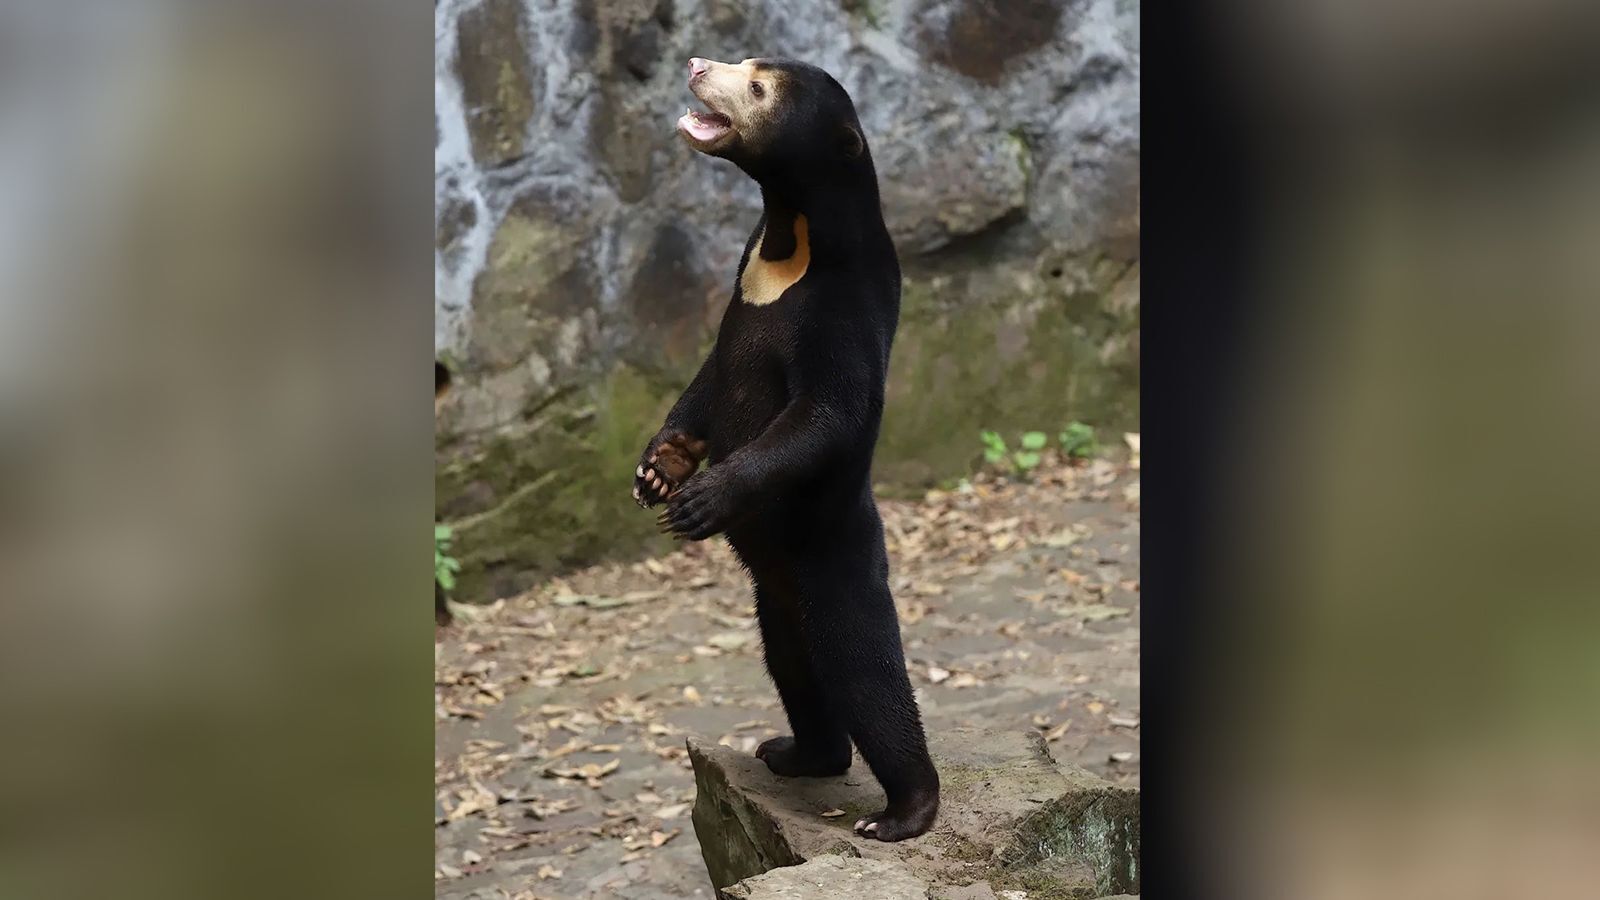 Chinese zoo denies its sun bears are people in costume